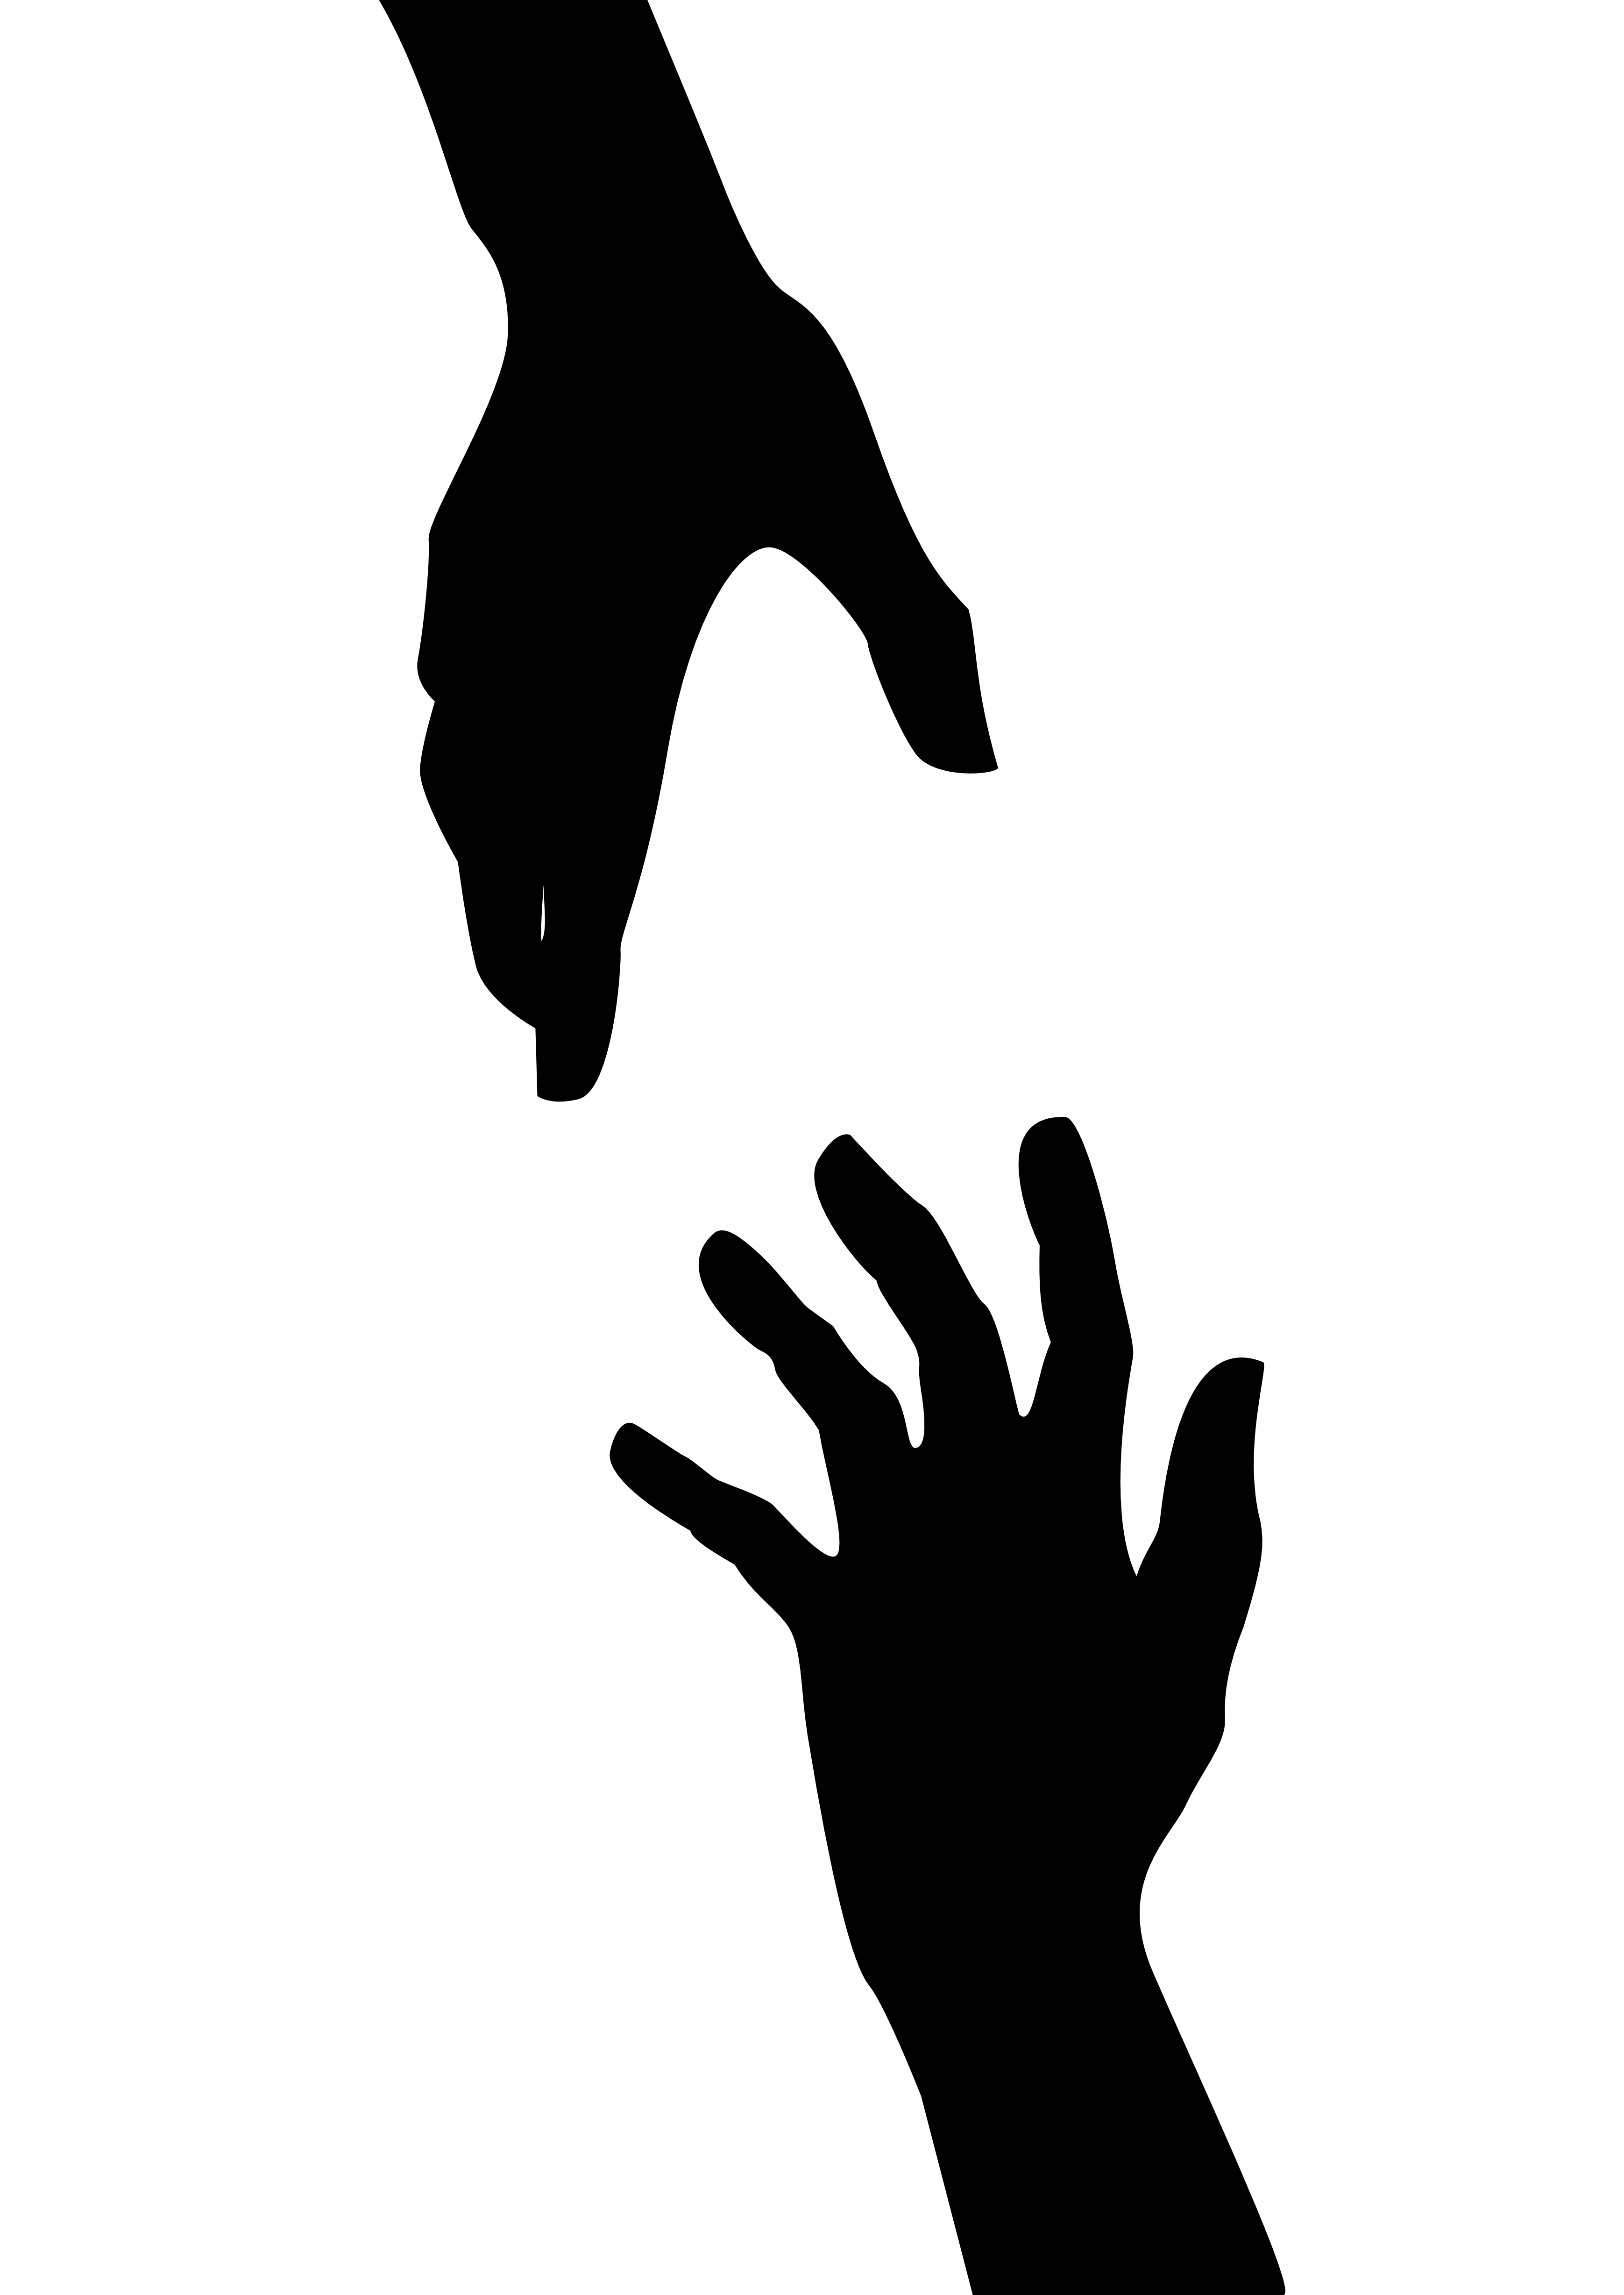 Hand reaching out clipart